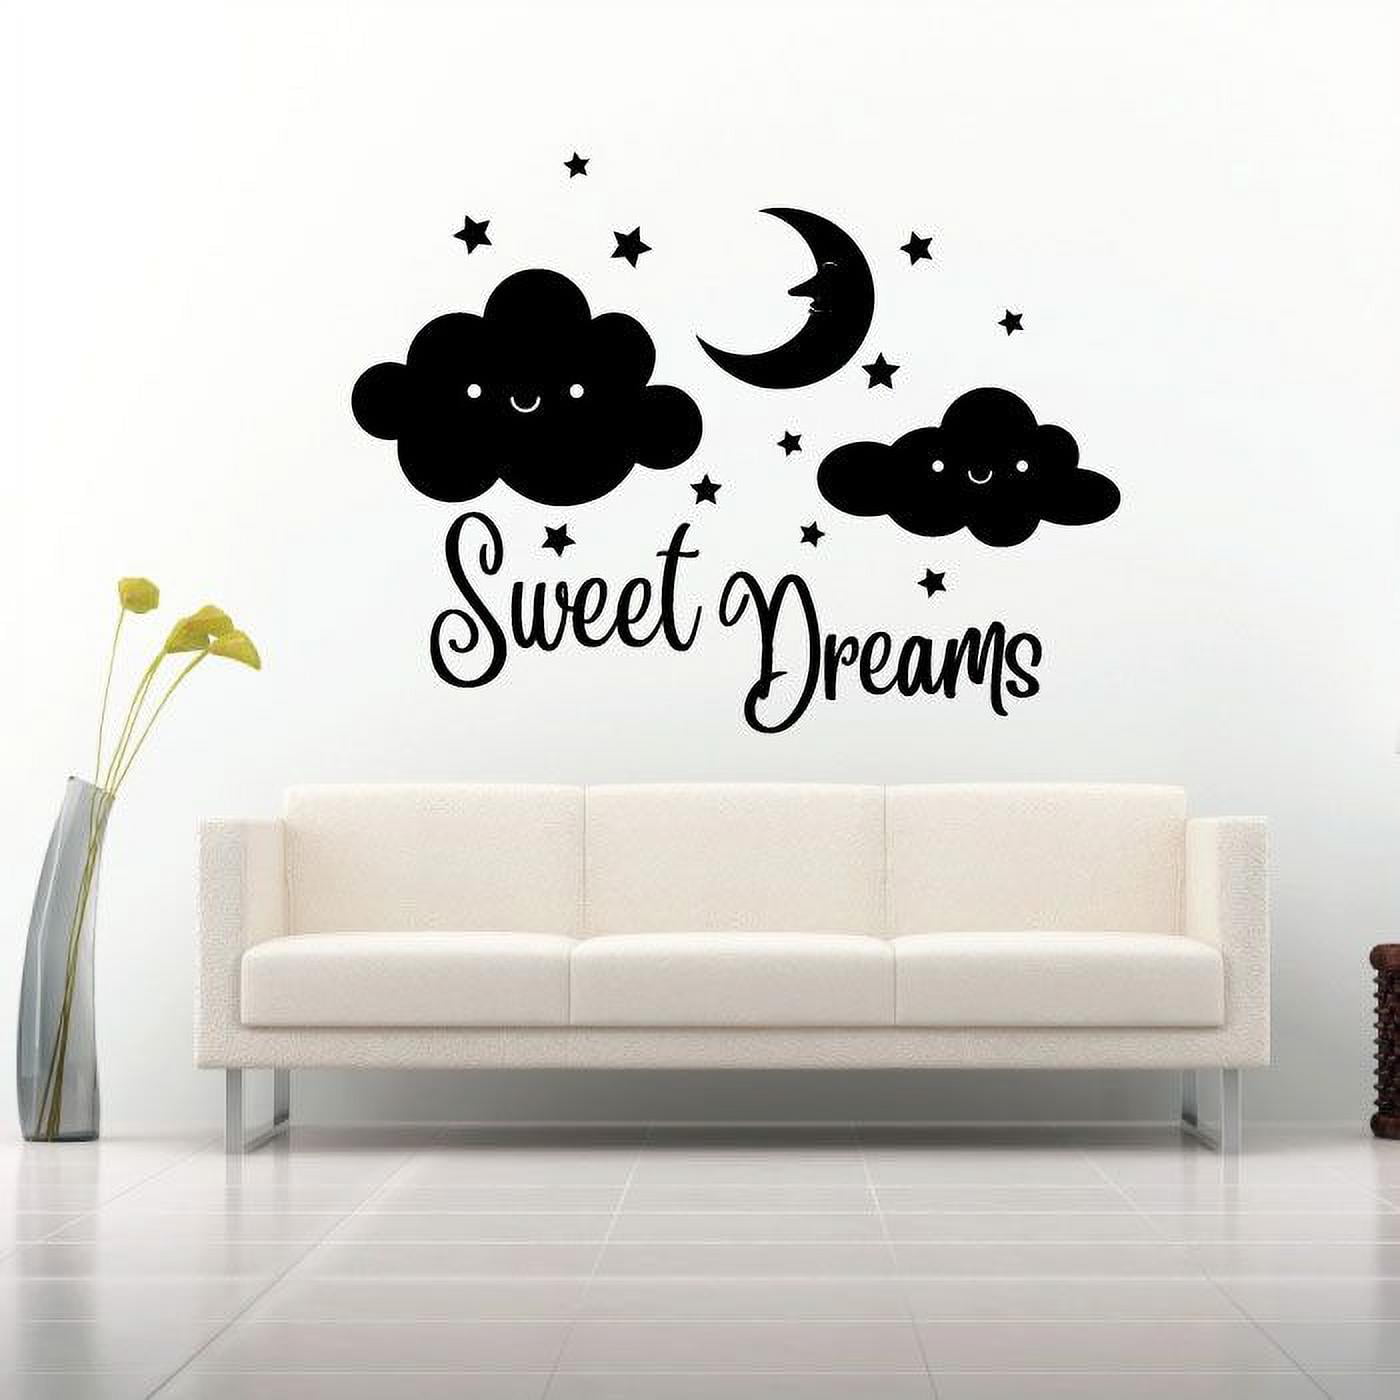 KIDS WALL STICKERS Childs Bedroom Sticker Nursery Quote transfer big art decal 